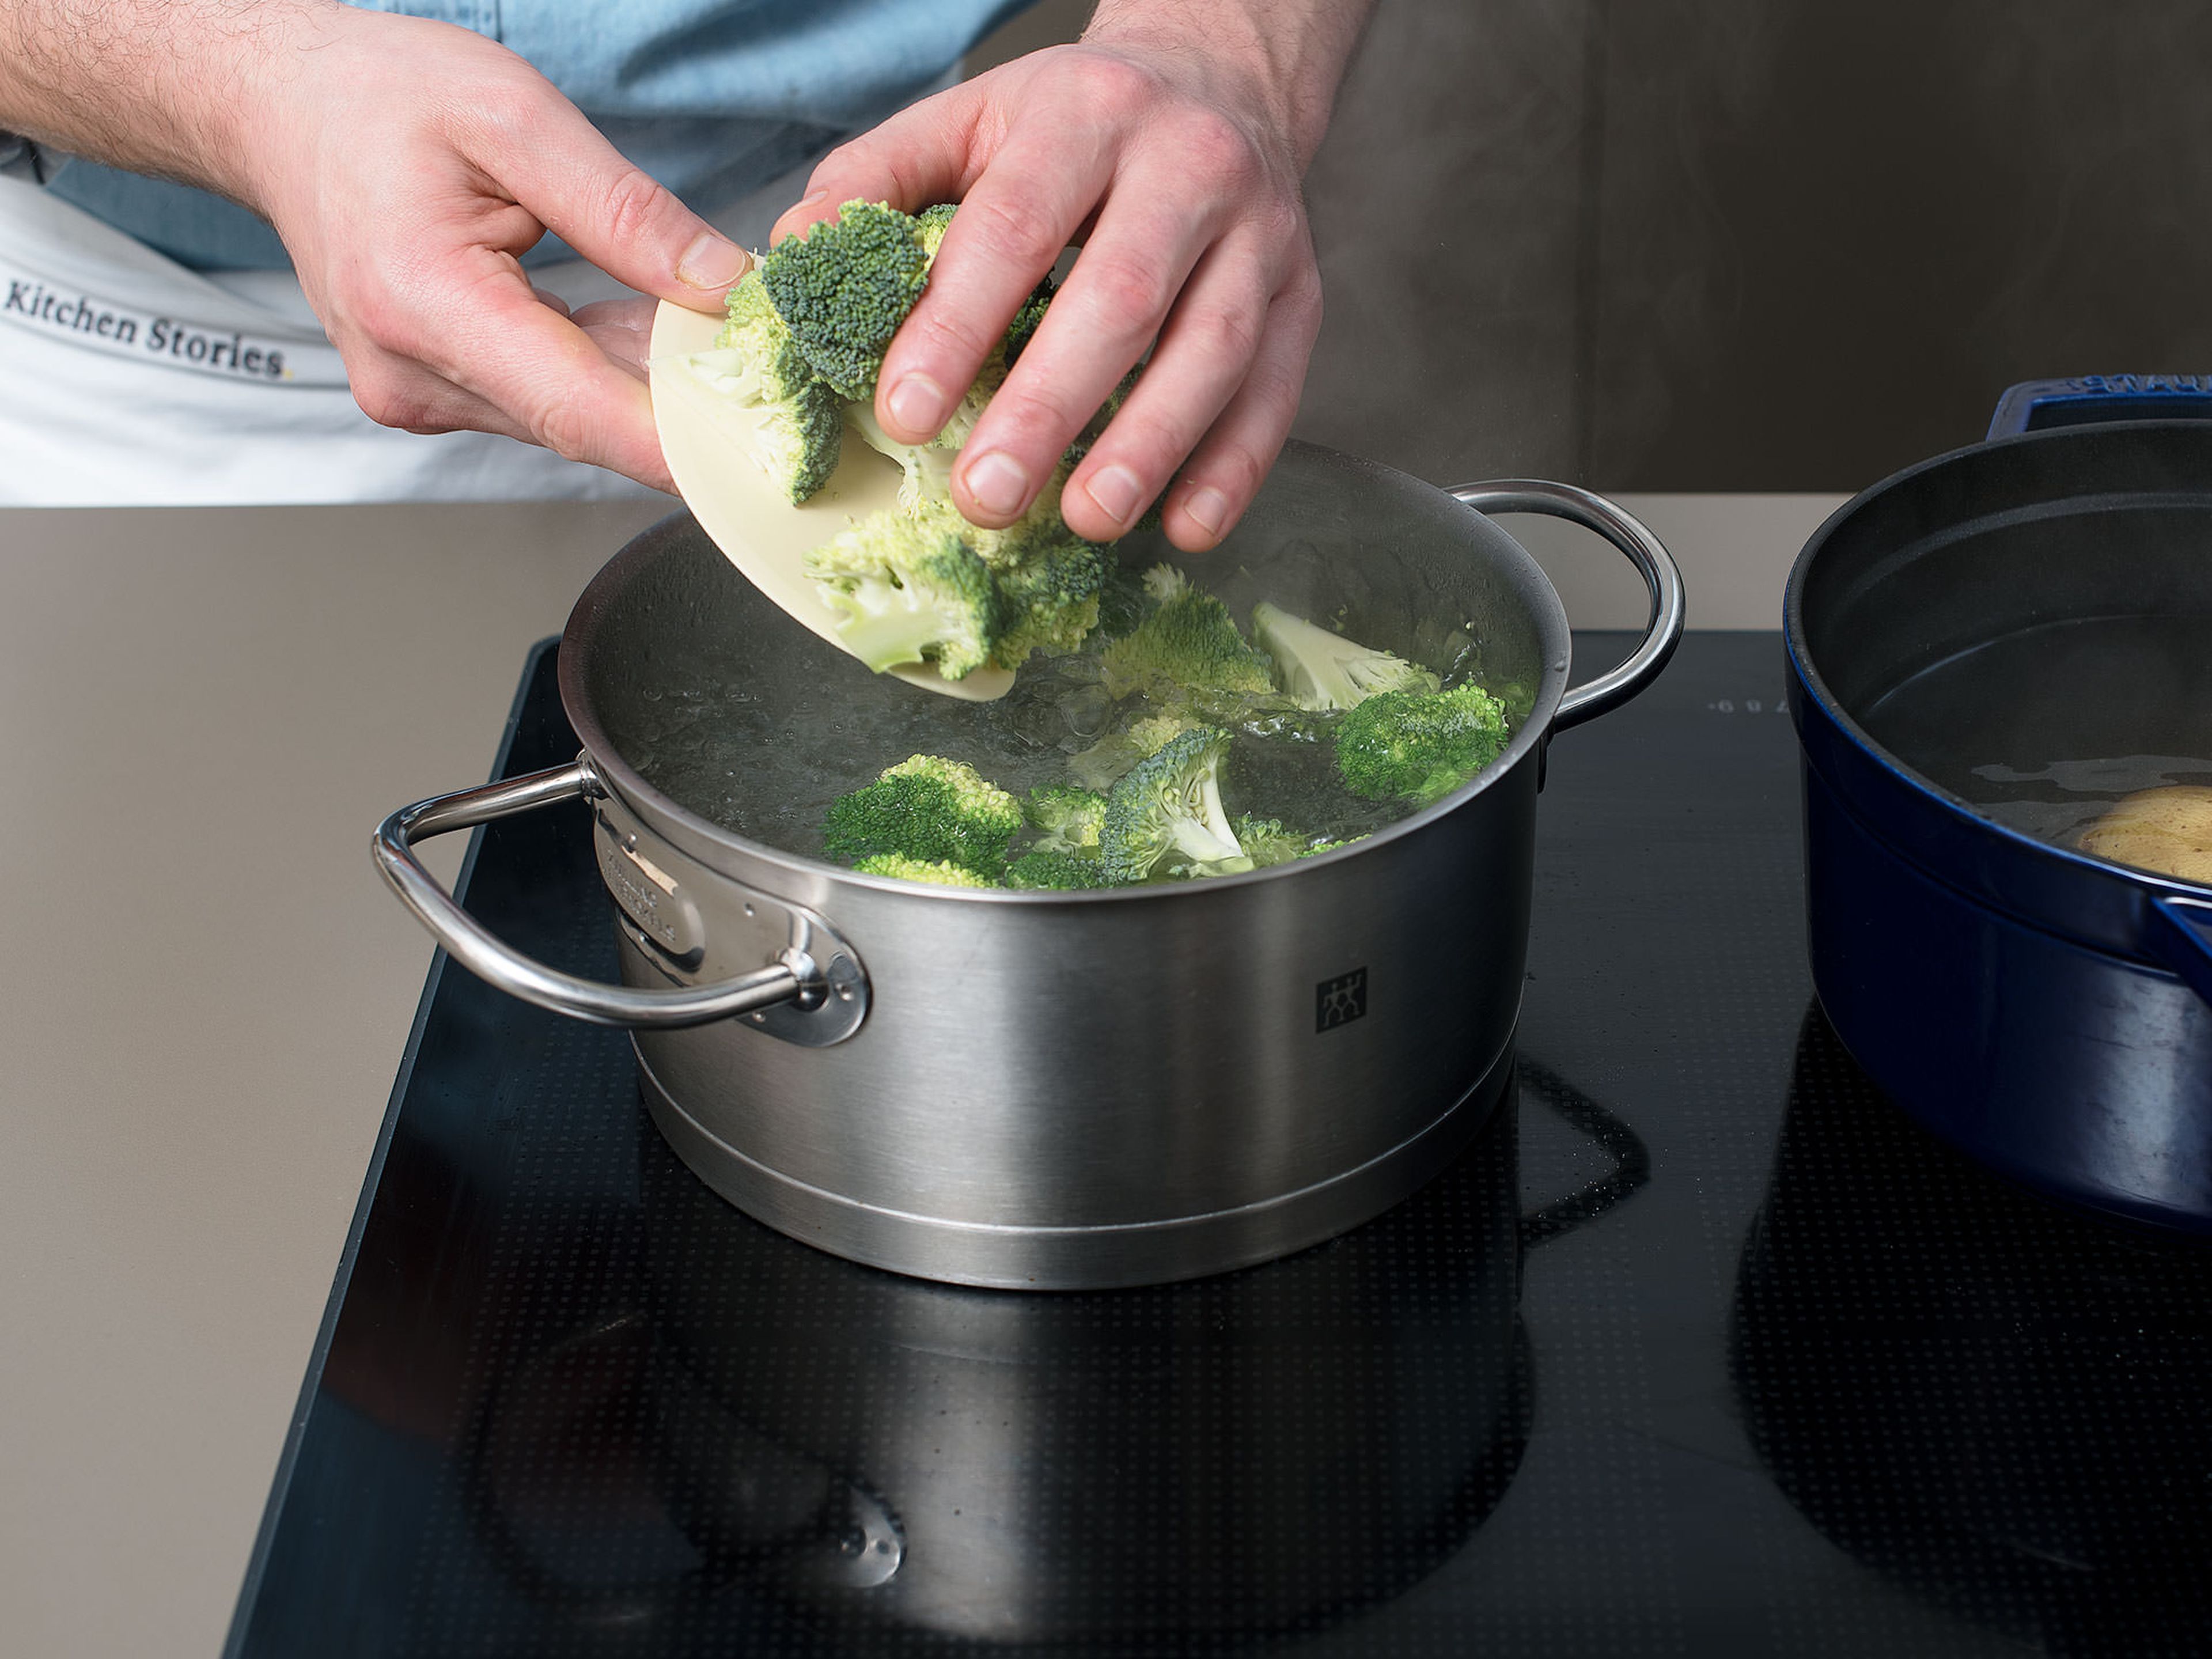 Bring another pot of water to a boil. Break broccoli into small florets and cook for approx. 3 min., or until firm to bite. Rinse with cold water and pat dry.